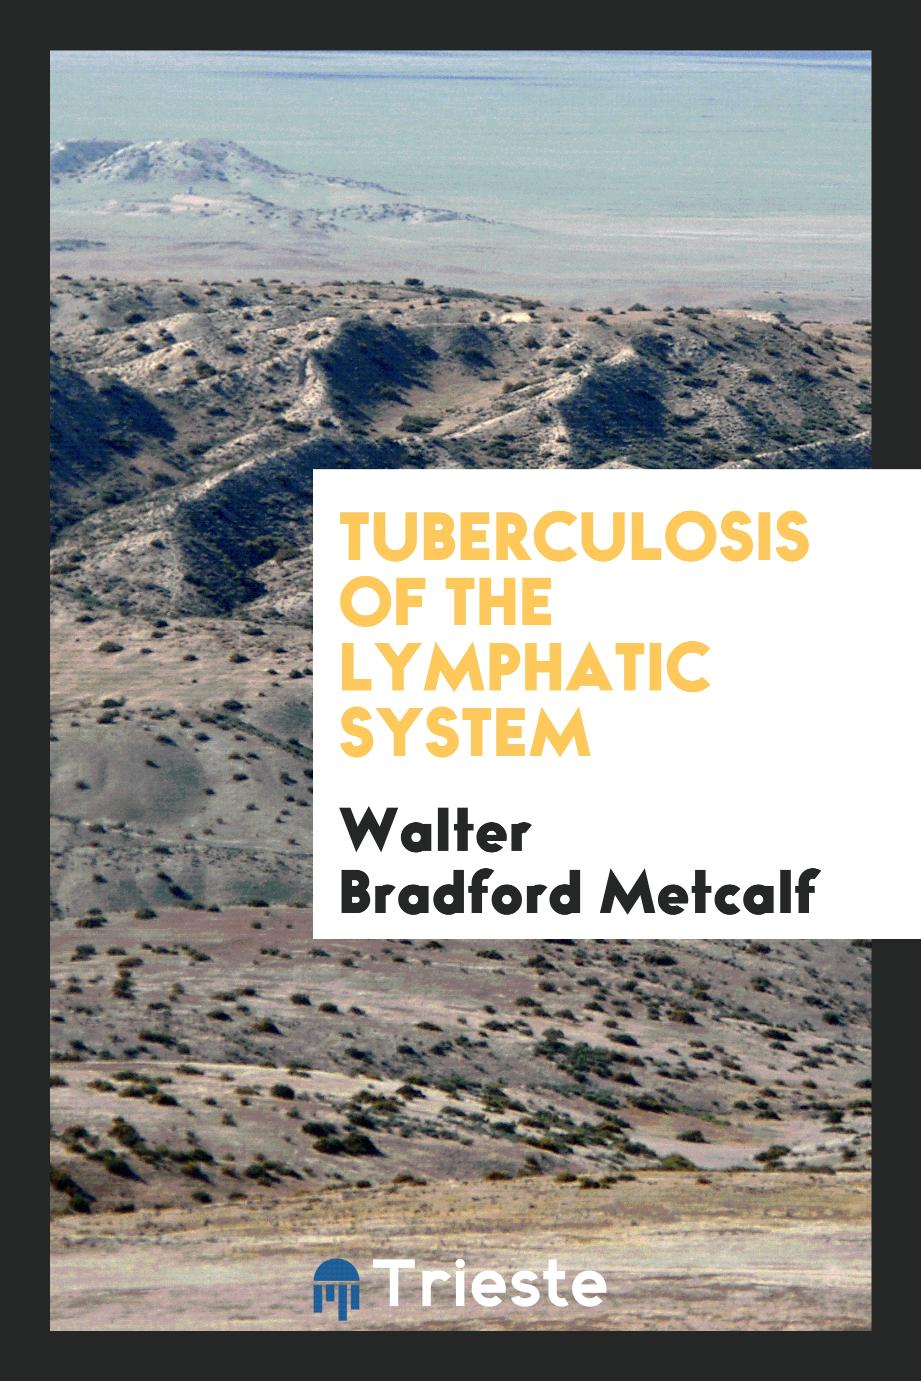 Tuberculosis of the lymphatic system